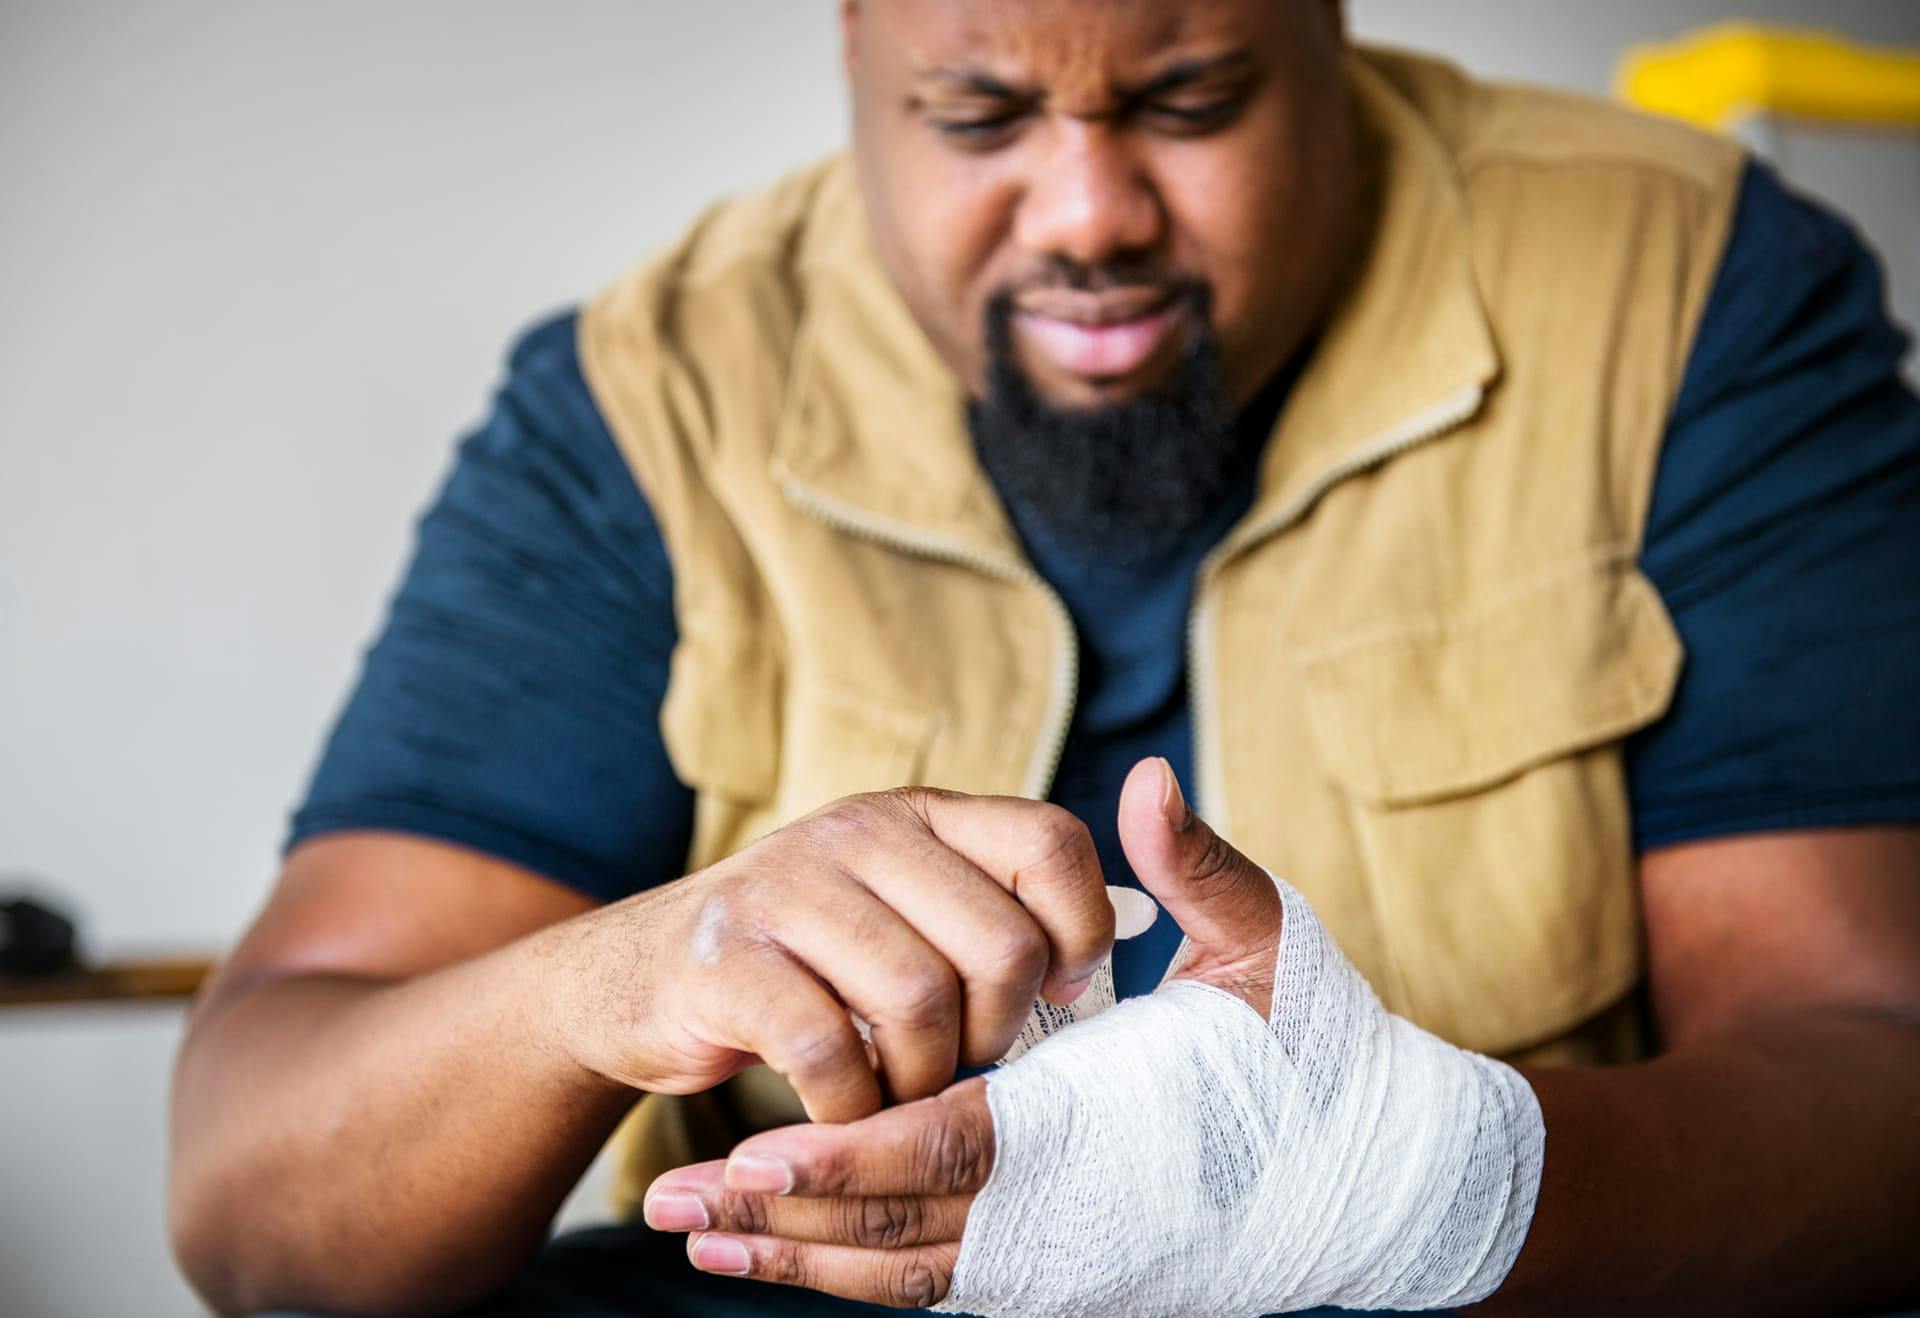 Man wrapping up his hand with gauze